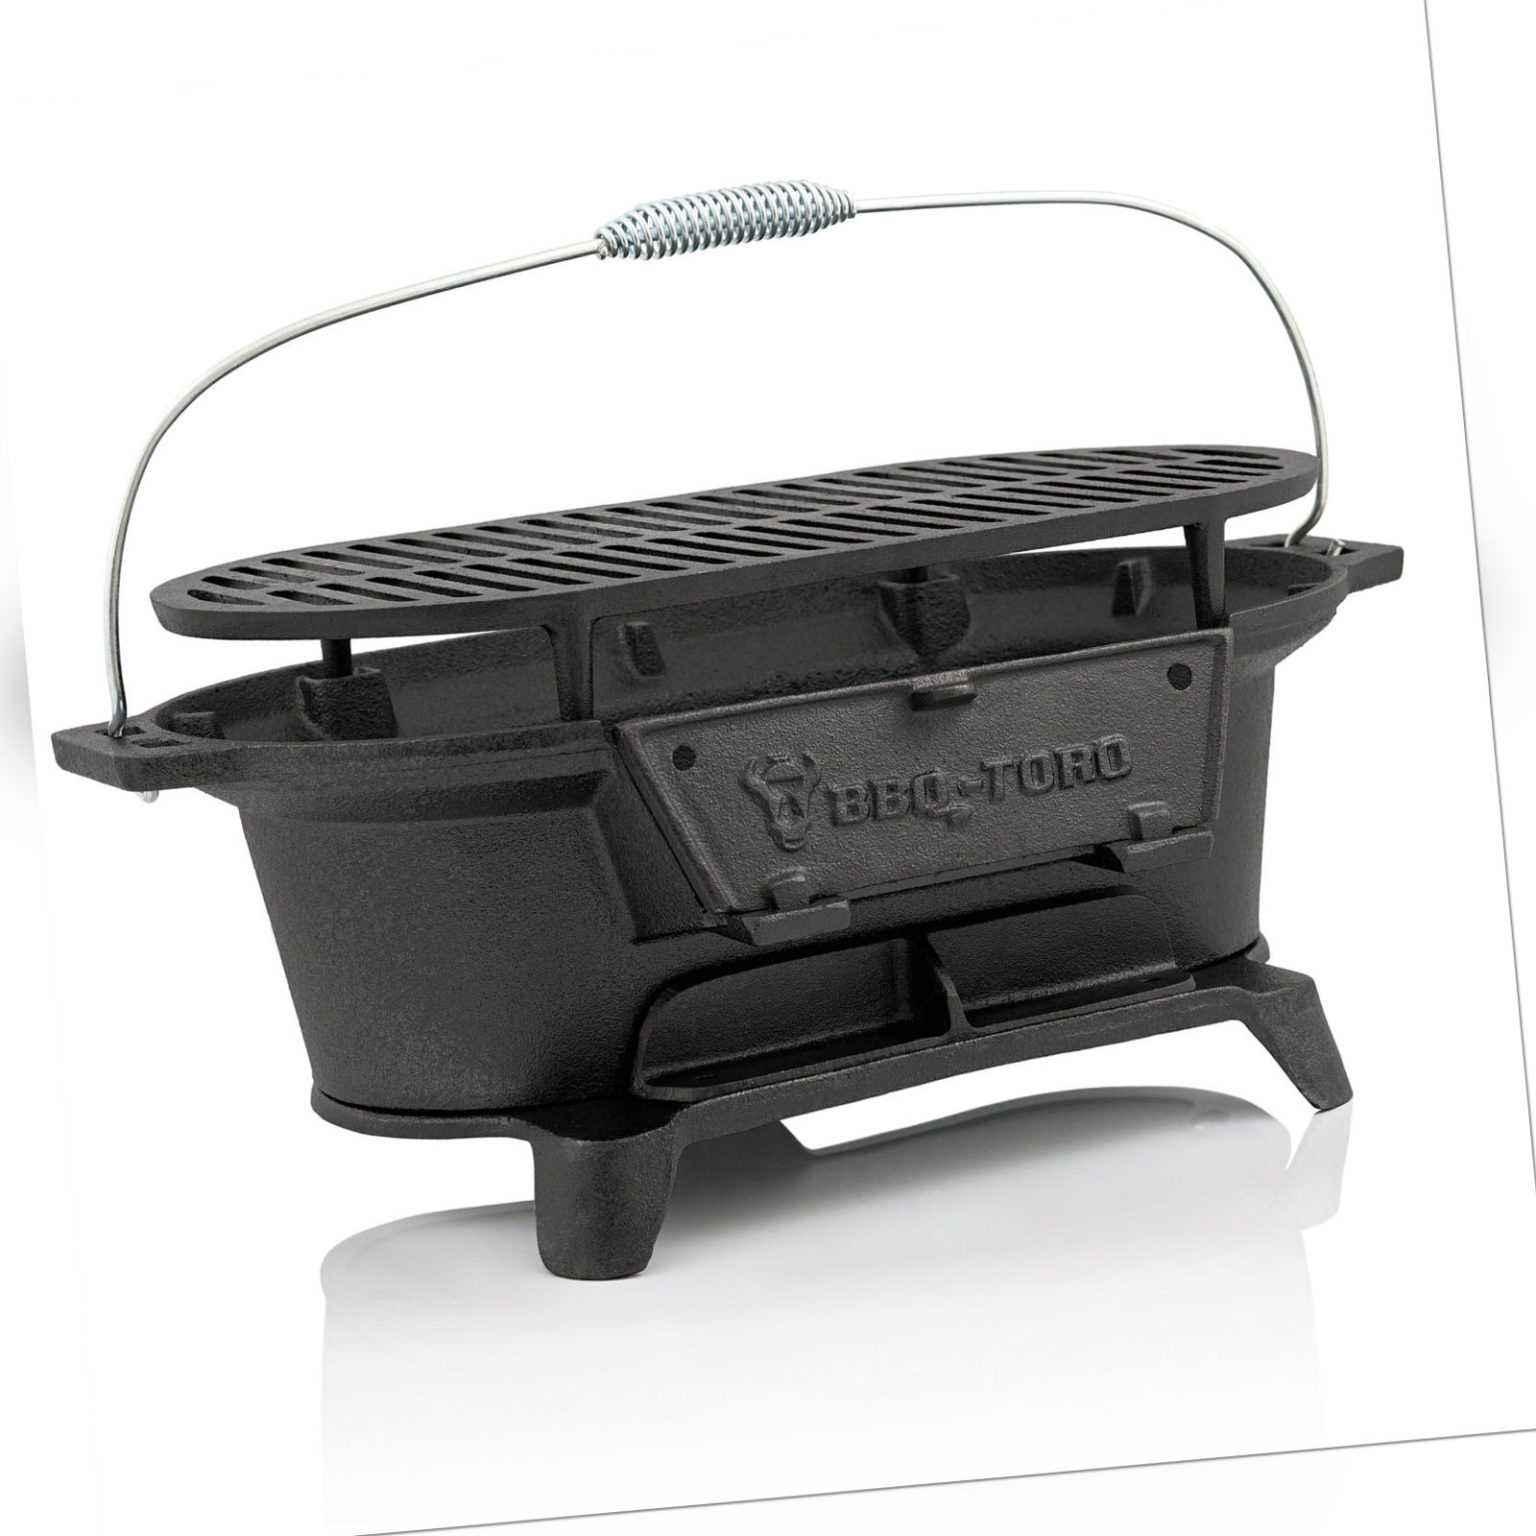 BBQ-Toro Gusseisen Grilltopf mit Grillrost Hibachi Style Holzkohle Campinggrill